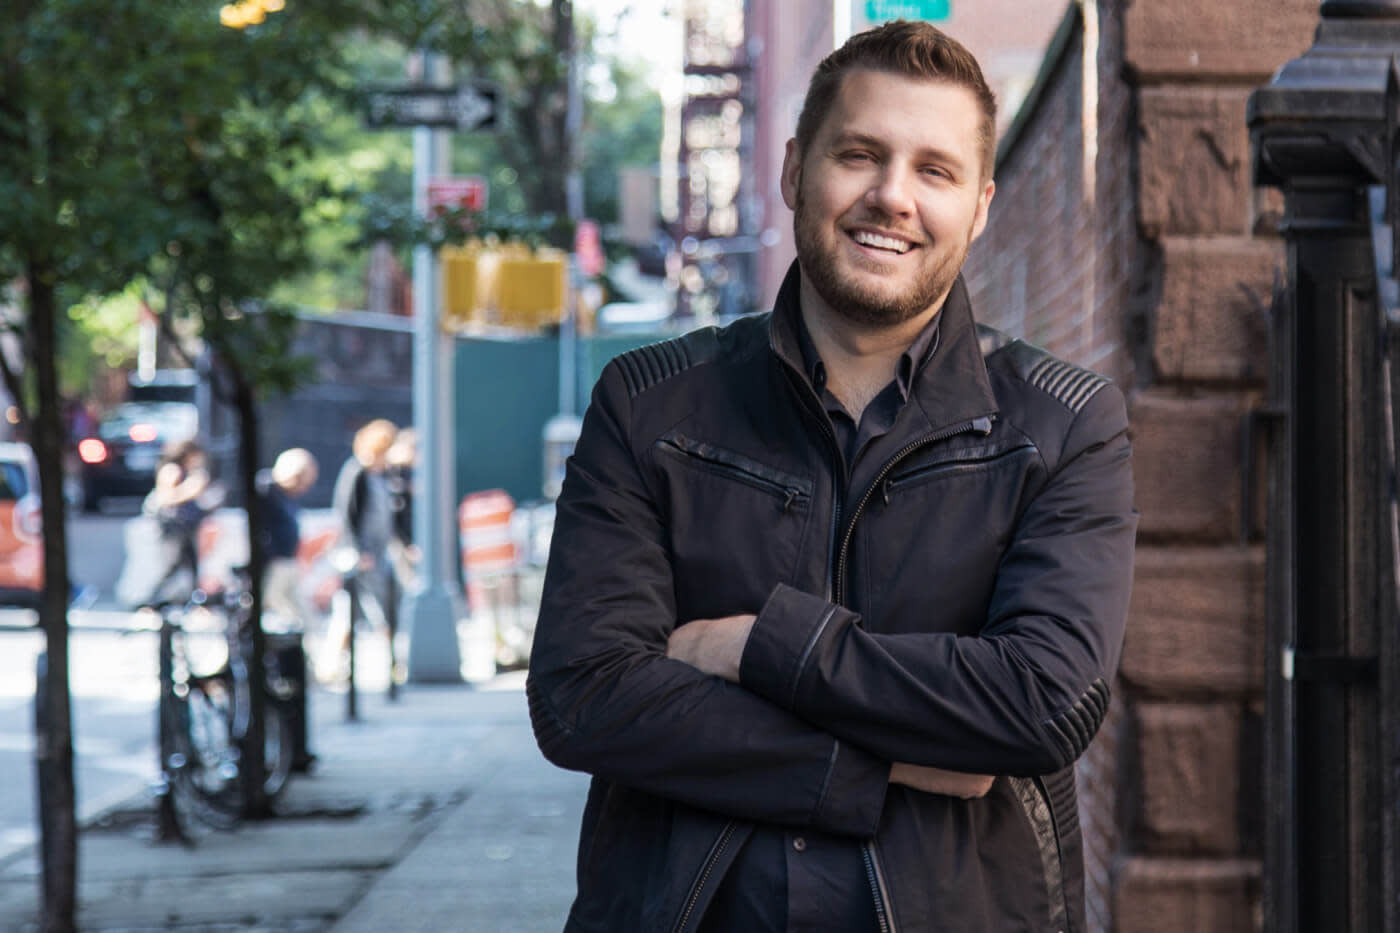 Mark Manson Wants You to Remember That ‘Love Is Not Enough’